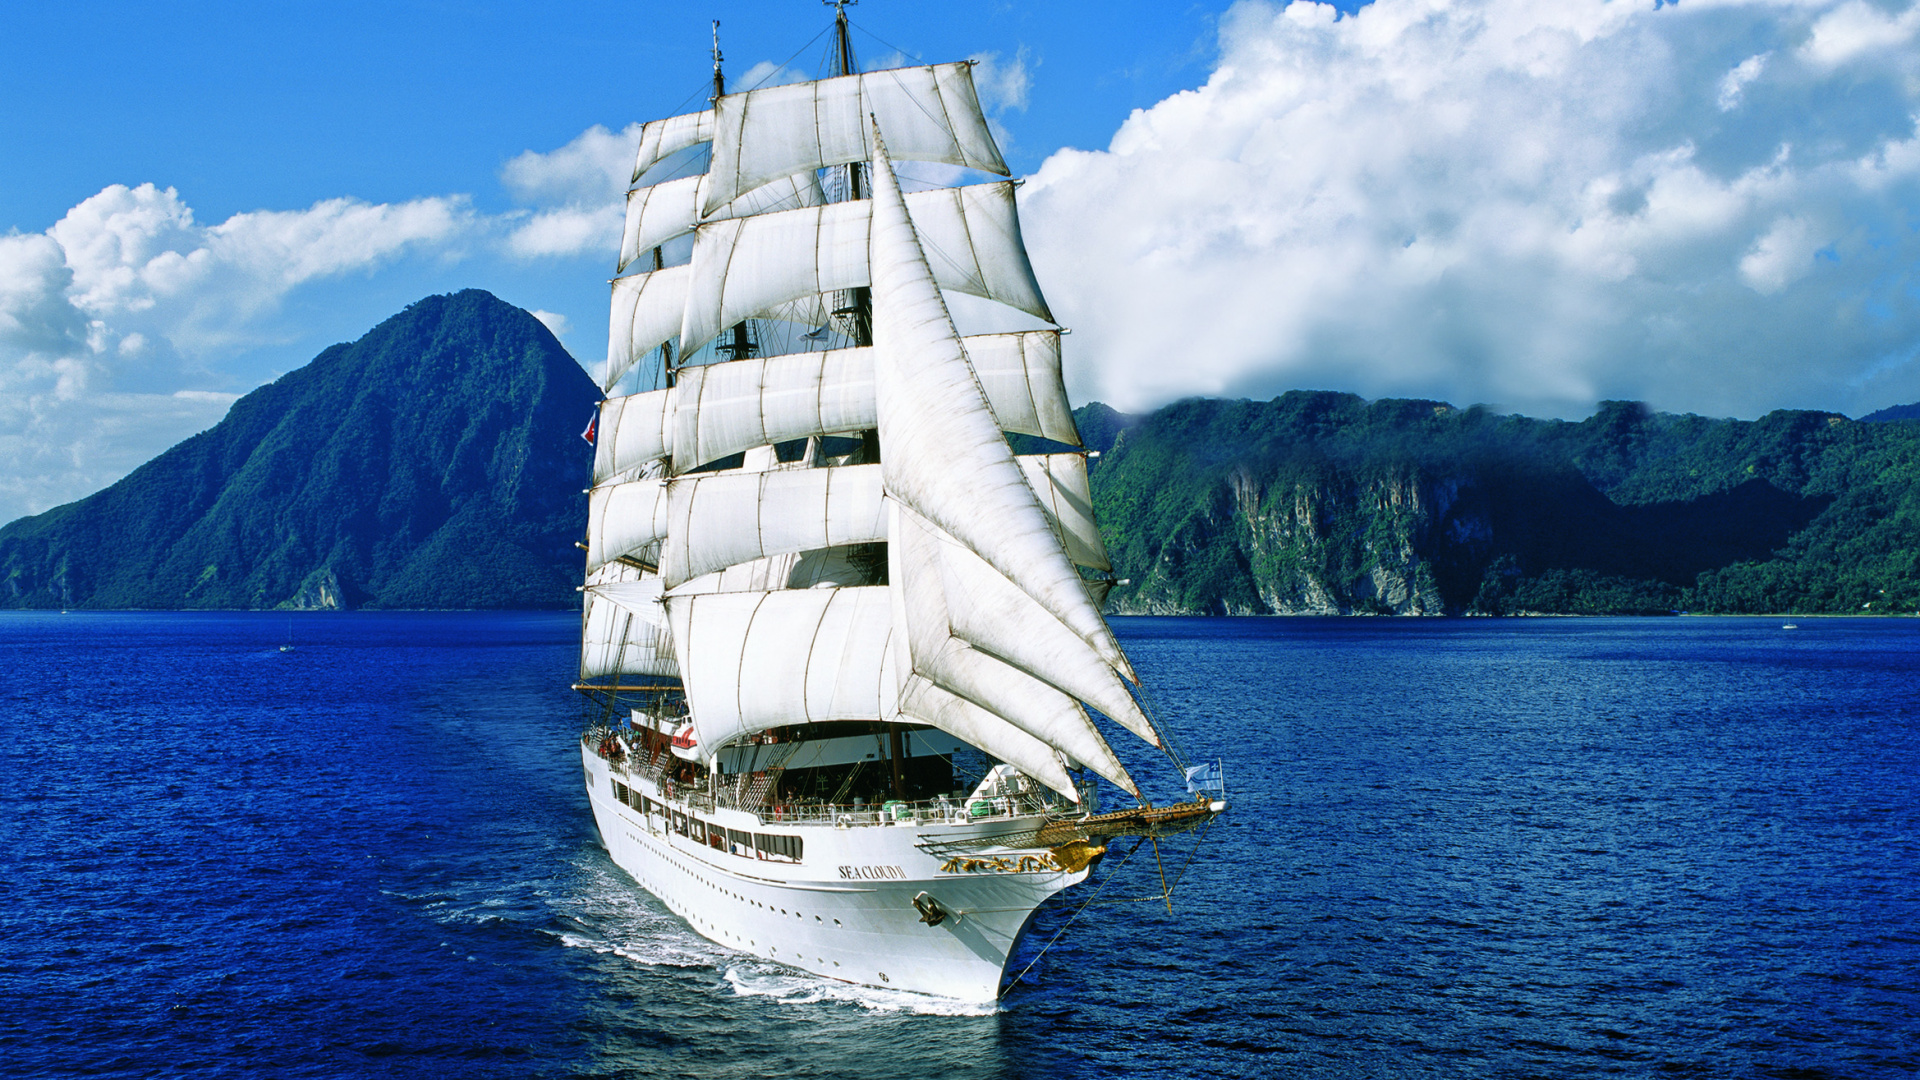 White Sail Boat on Sea During Daytime. Wallpaper in 1920x1080 Resolution